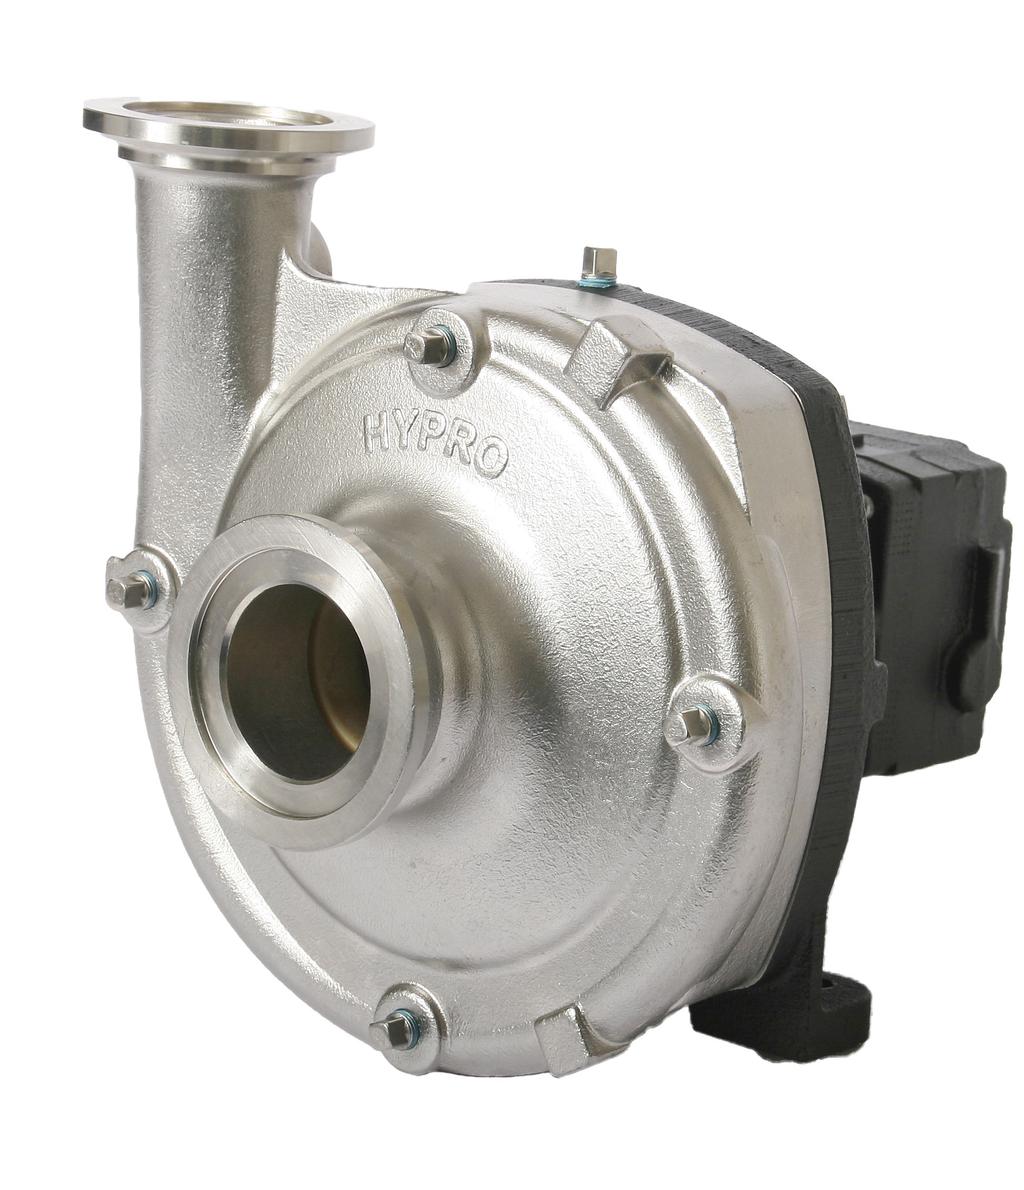 Centrifugal pumps are very durable and require no routine maintenance by the user.